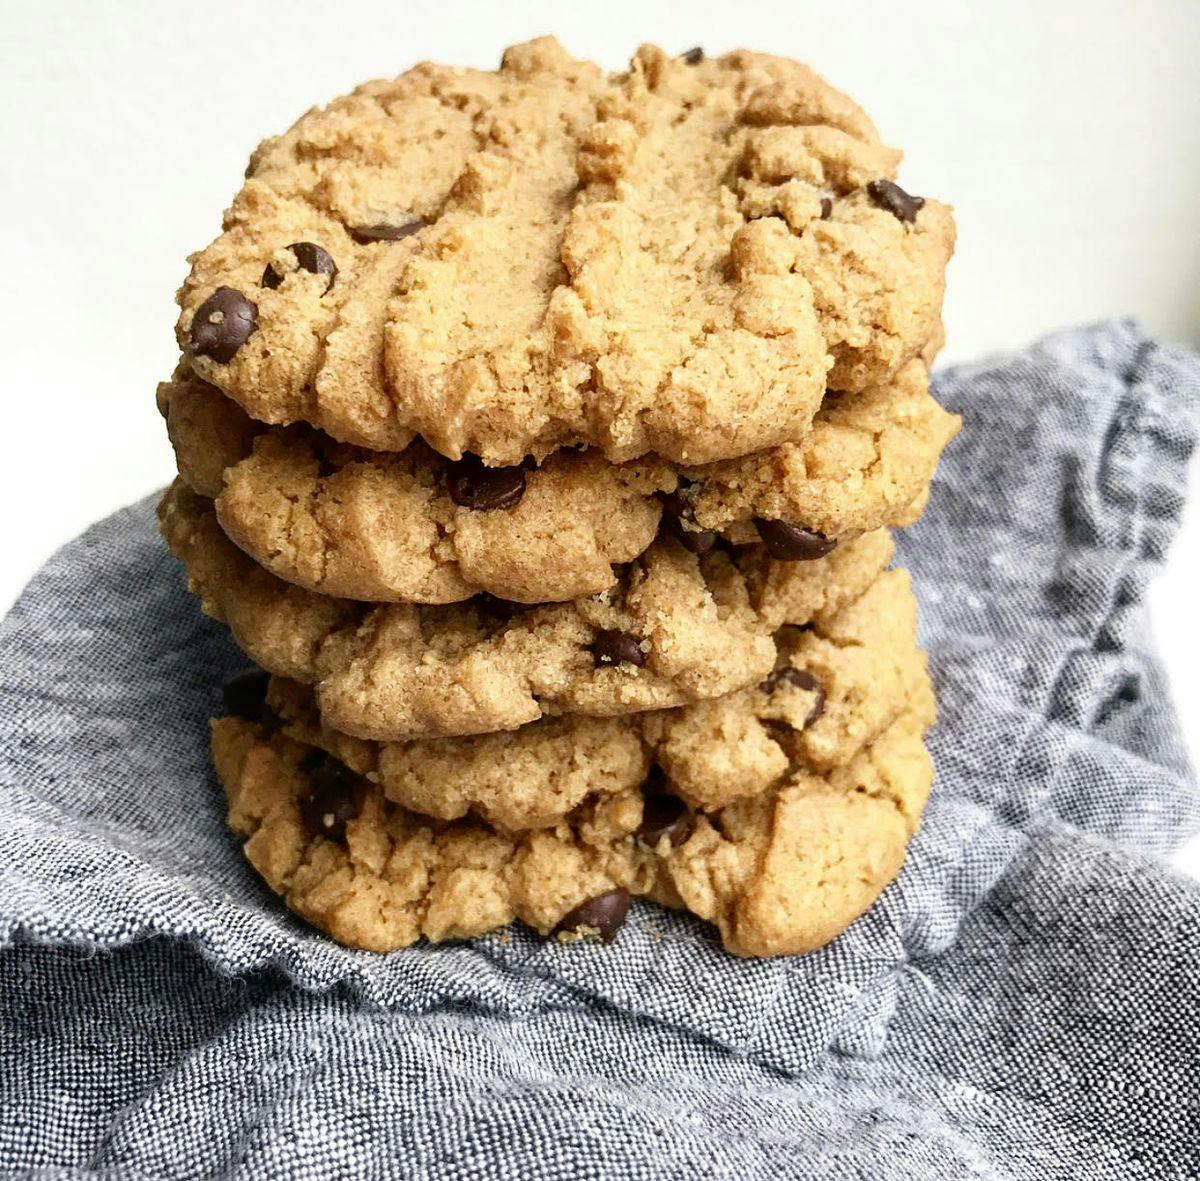 Peanut butter chocolate chip cookies stacked